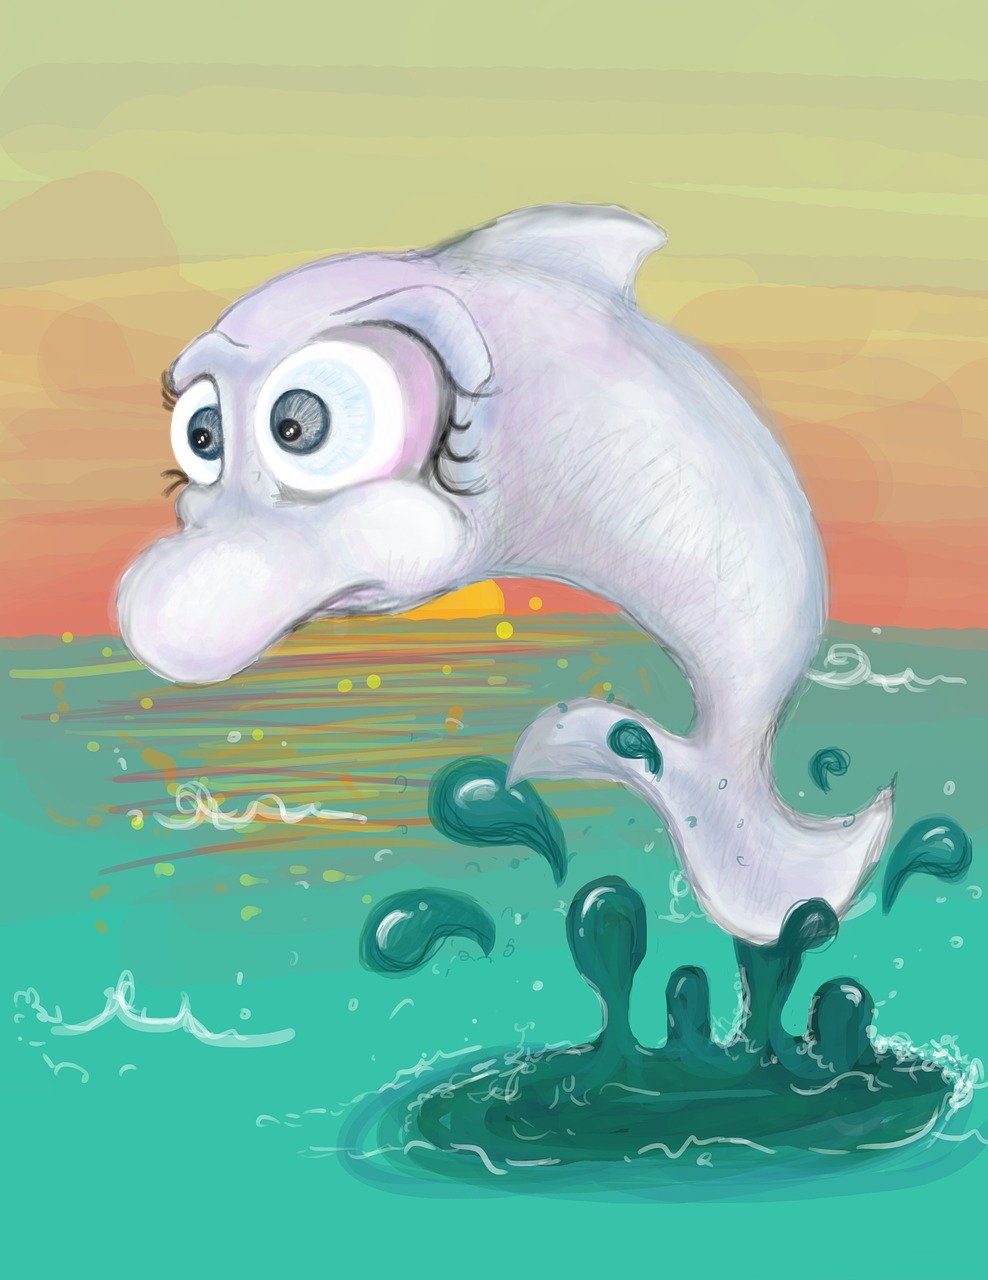 a drawing of a dolphin jumping out of the water, a digital painting, inspired by Farel Dalrymple, process art, weird silly thing with big eyes, blurred and dreamy illustration, no gradients, a silver haired mad